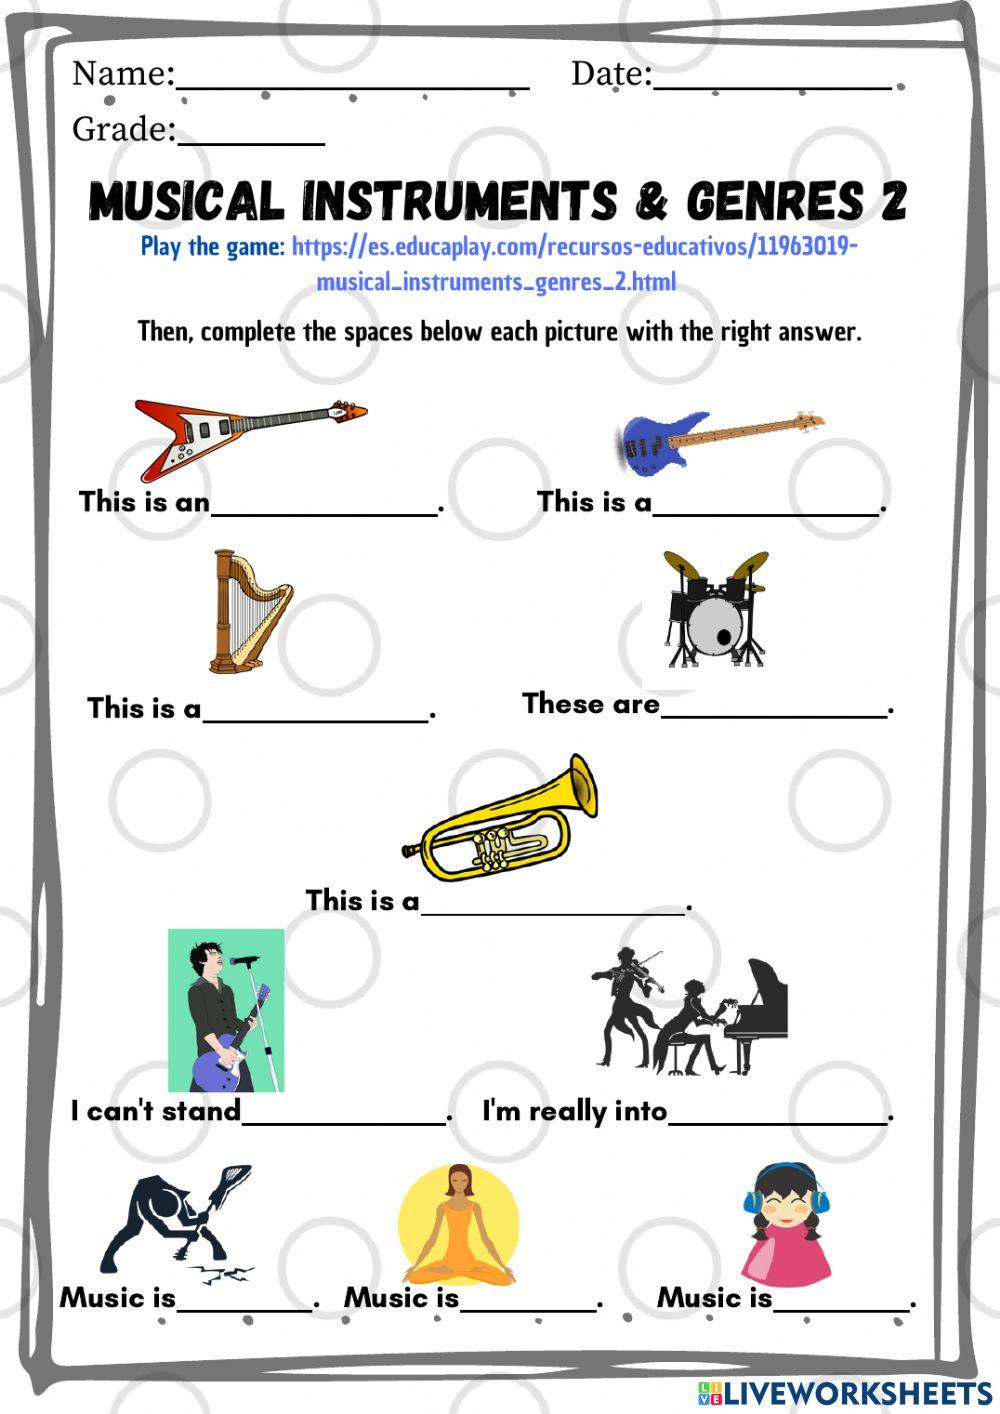 (Cycle 1 Session 3 Annex 4) - Musical instruments - genres 2